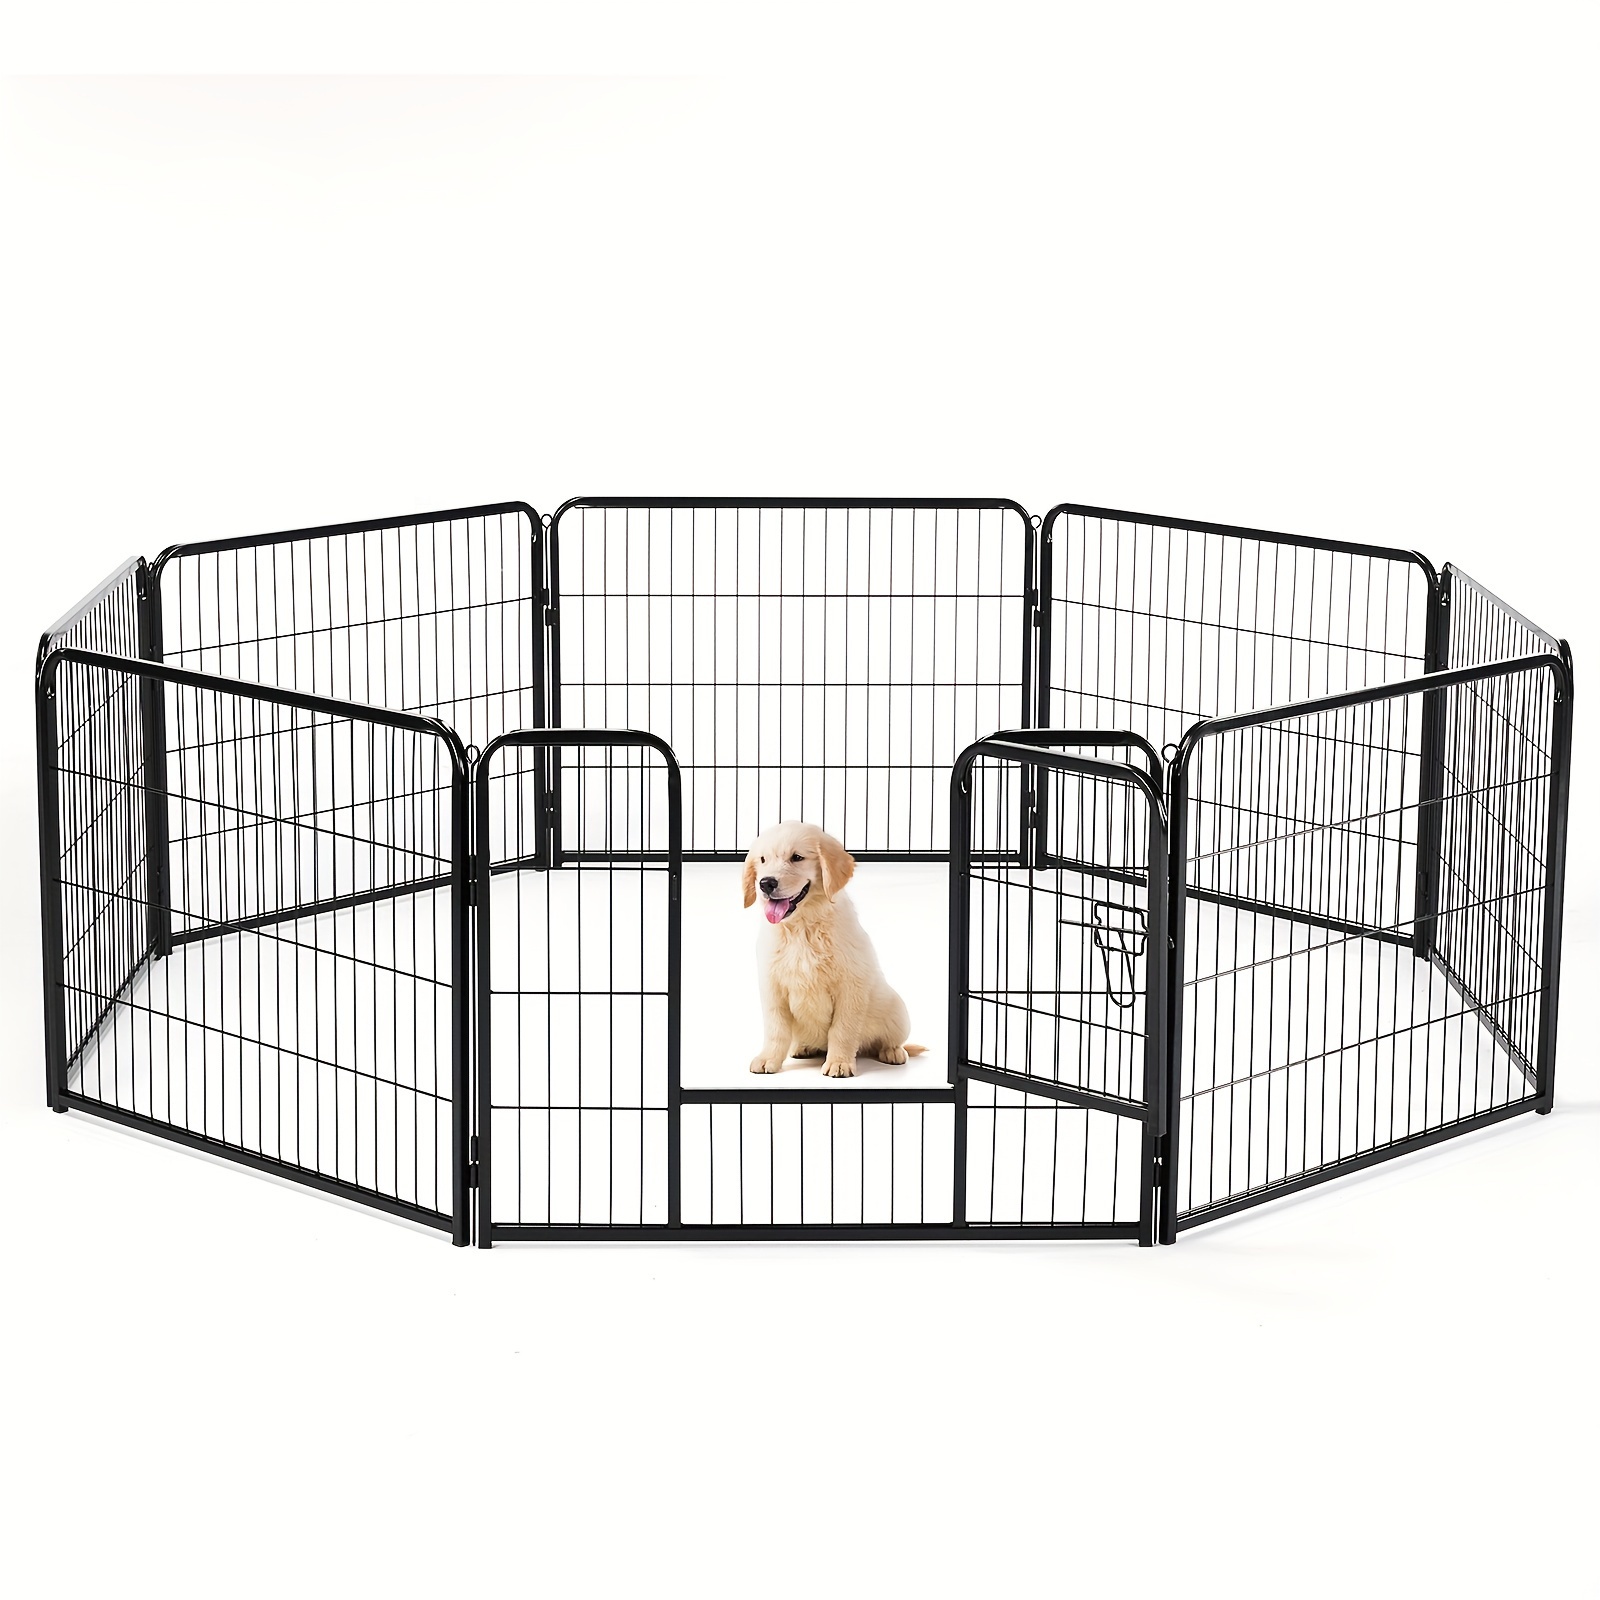 

Smug Dog Playpen Indoor Fence 8 Panel 24" Height Metal Exercise Pen With Door Small Puppy/medium/large Dogs Animal Pet For Outdoor, Garden, Yard, Rv Camping